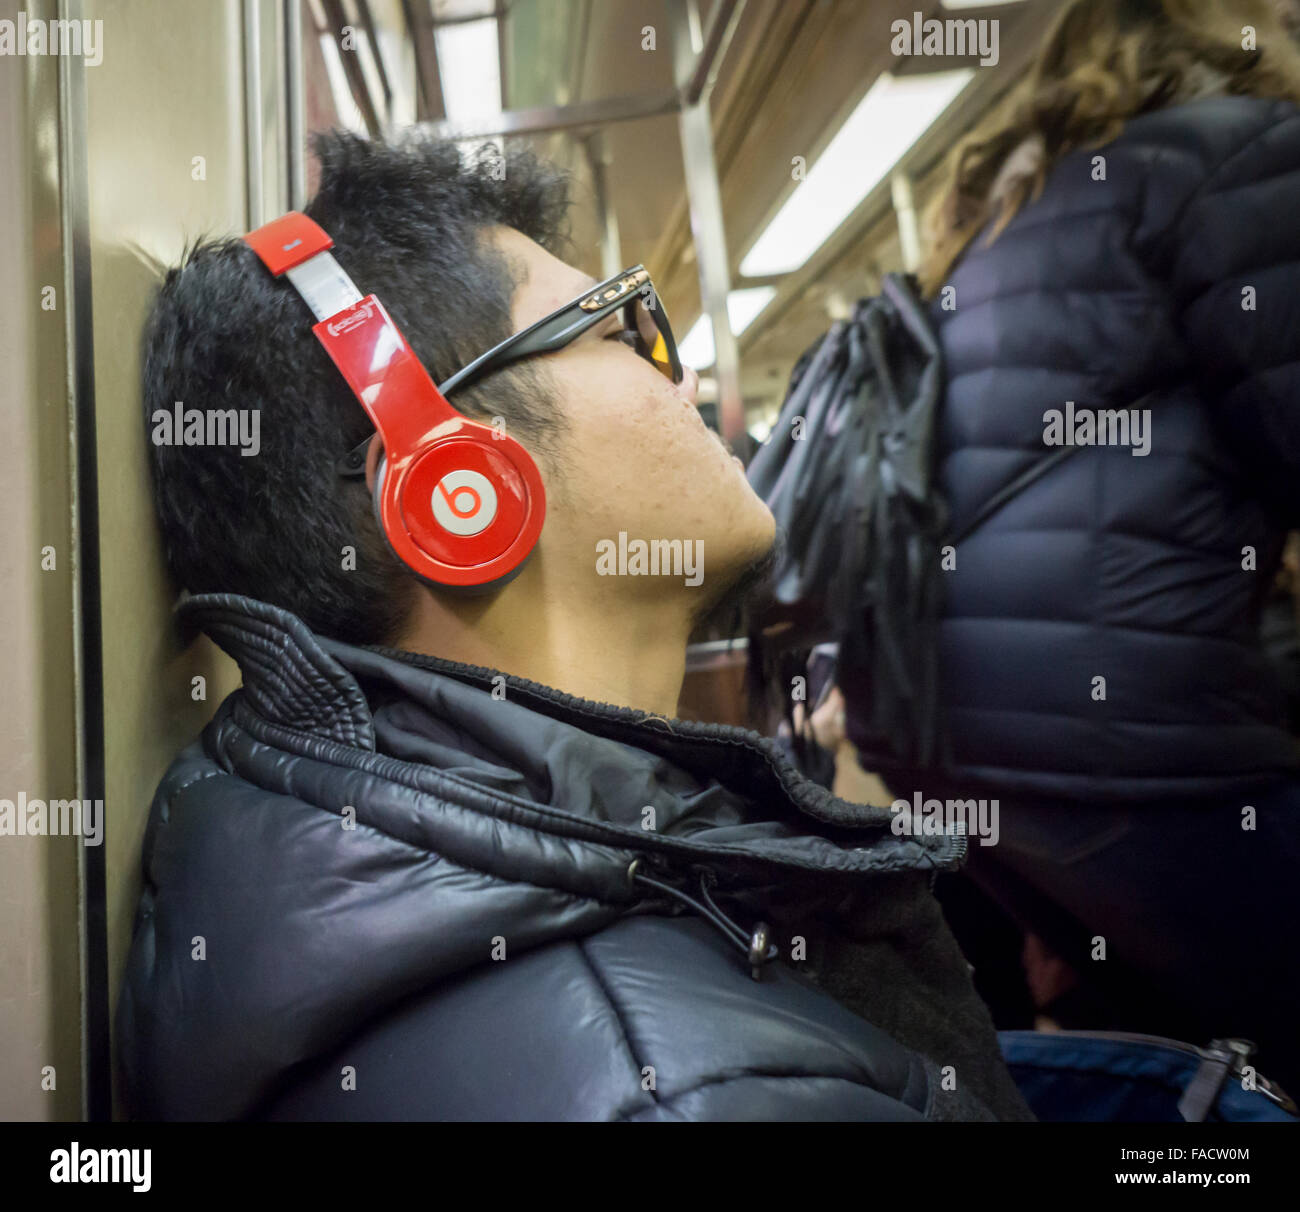 A music listener wears his Beats by Dr. Dre over the ear headphones during a subway ride in New York on Saturday, December 19, 2015. (© Richard B. Levine) Stock Photo